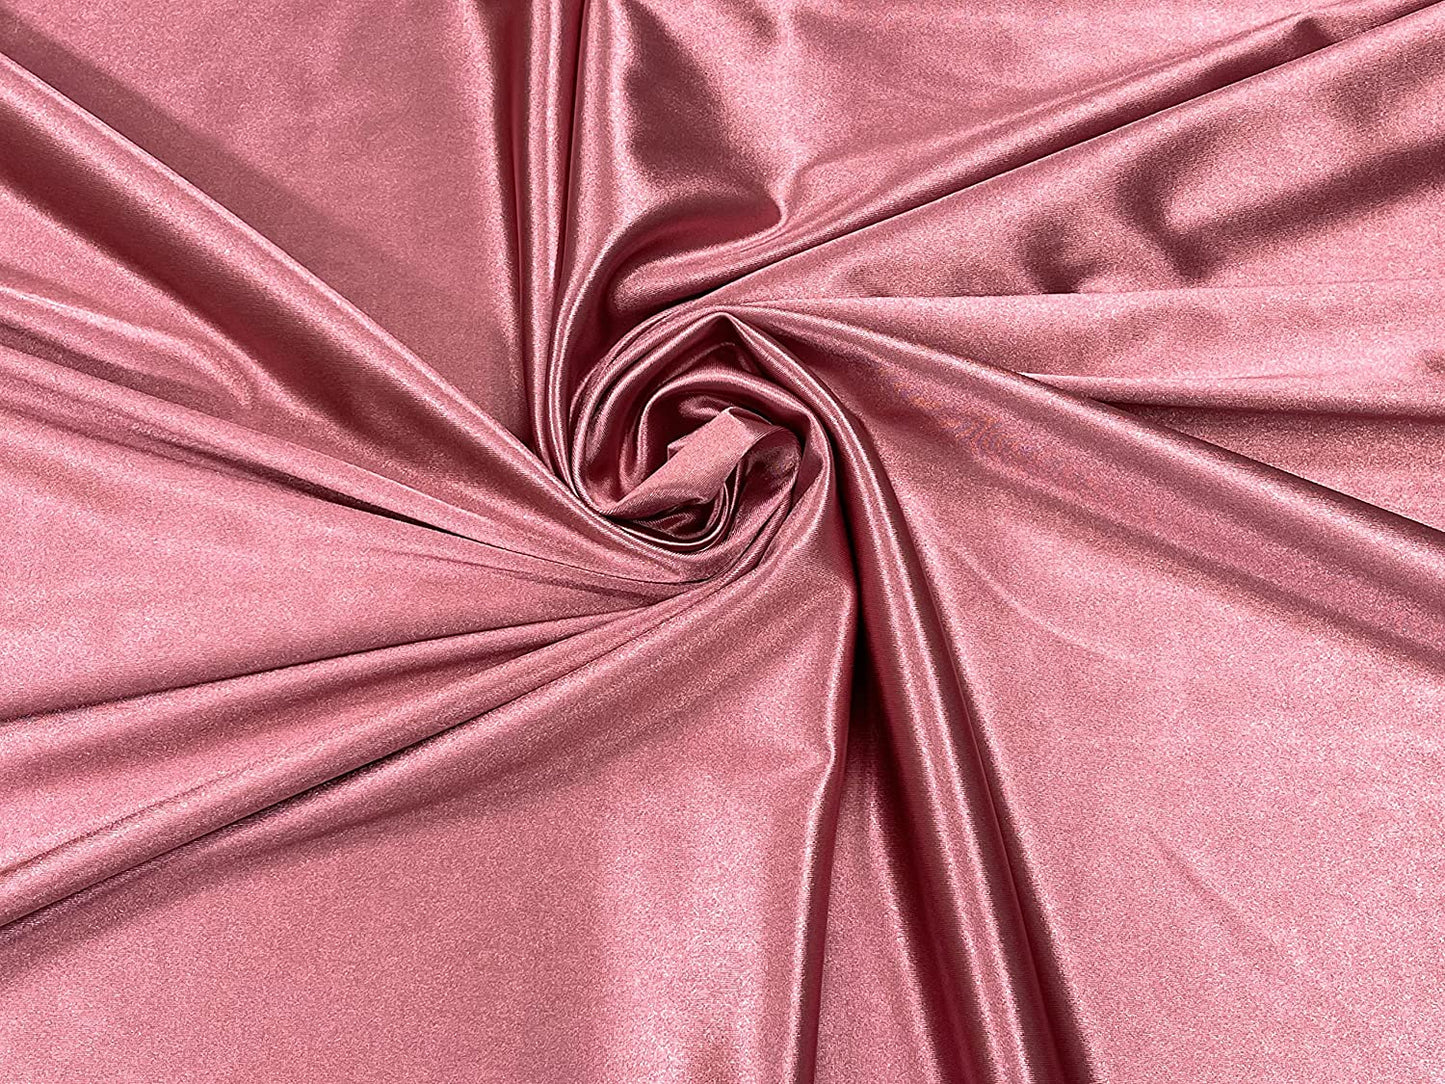 Deluxe Shiny Polyester Spandex Stretch Fabric (1 Yard, Mauve)